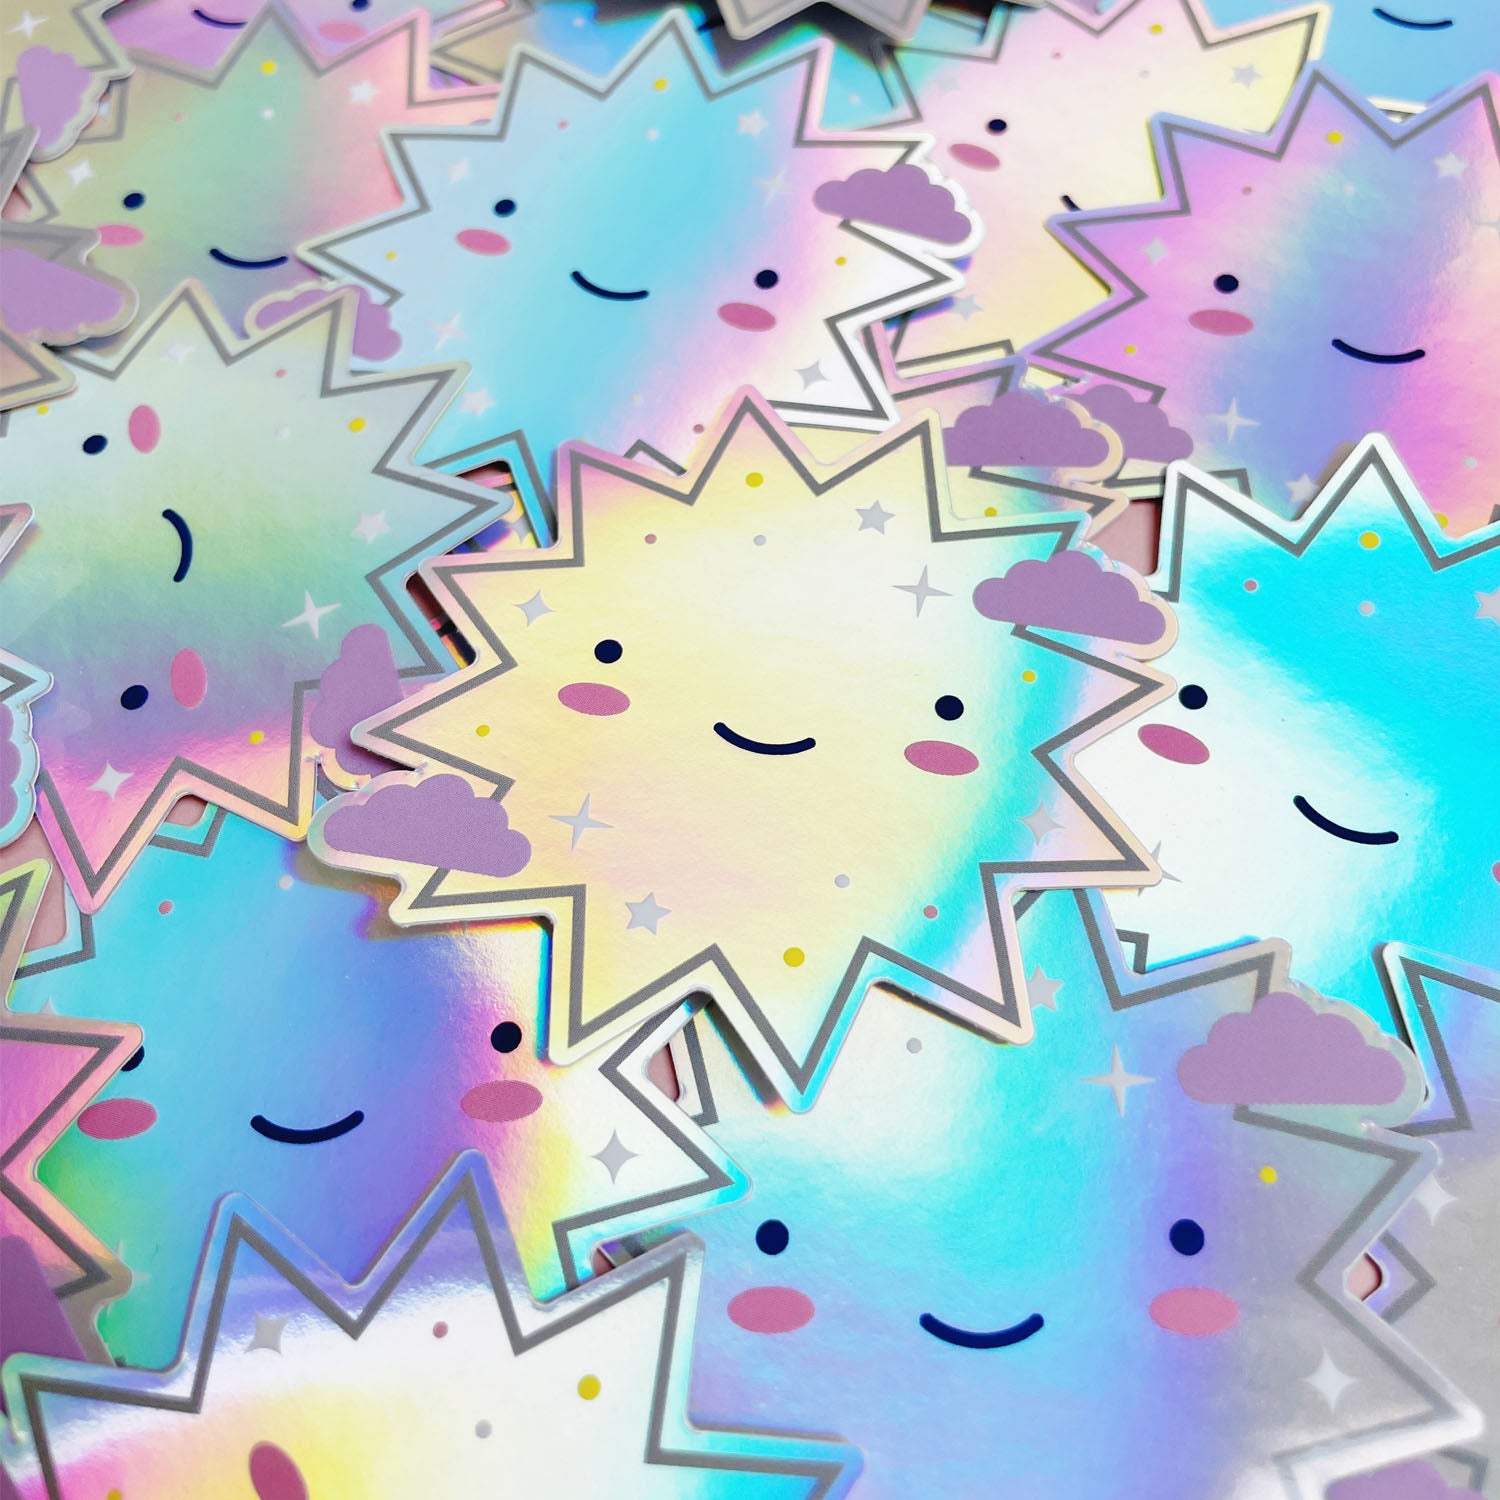 A pile of shiny iridescent holographic vinyl sticker featuring a smiling starburst. The surface is covered with dozens of the same design.